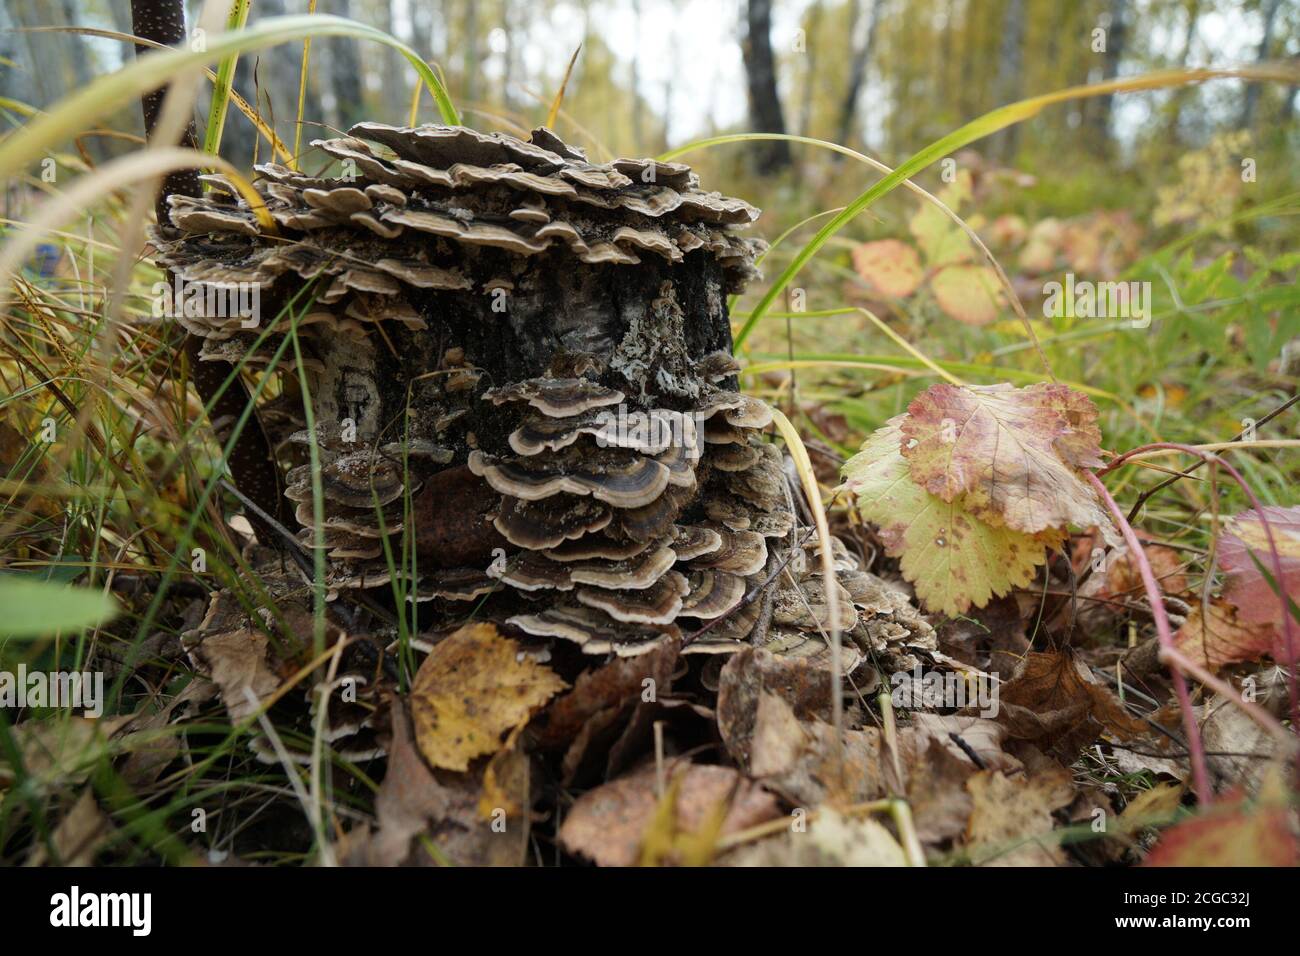 Mushroom parasite. Tinder fungus (Trametes versicolor) grows on a birch stump in the autumn forest. Stock Photo